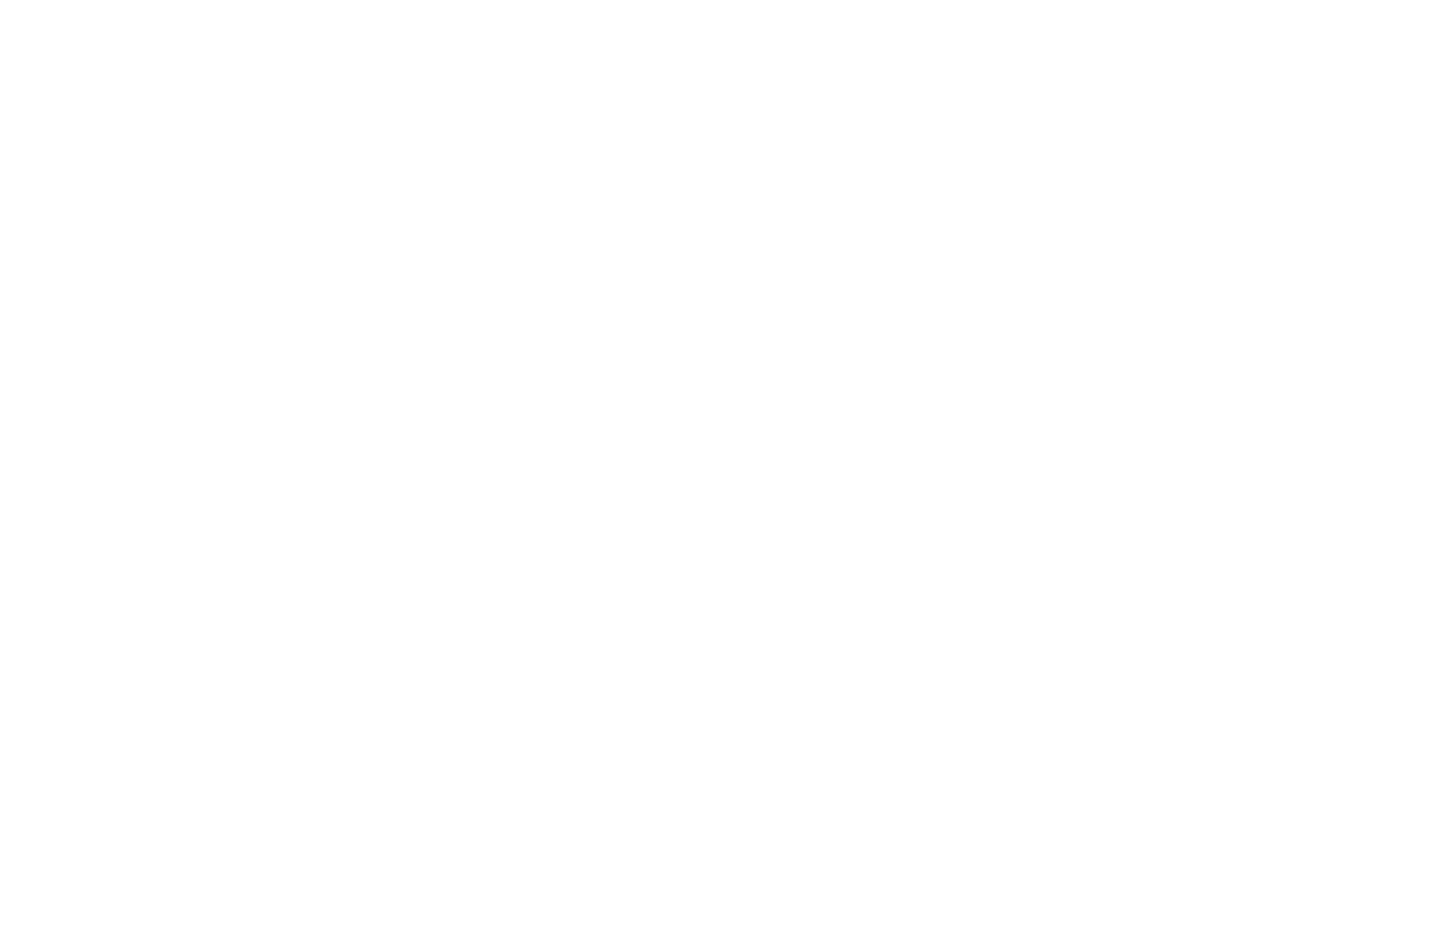 Jessie Ball duPont Fund | Equity, Placemaking, Impact 